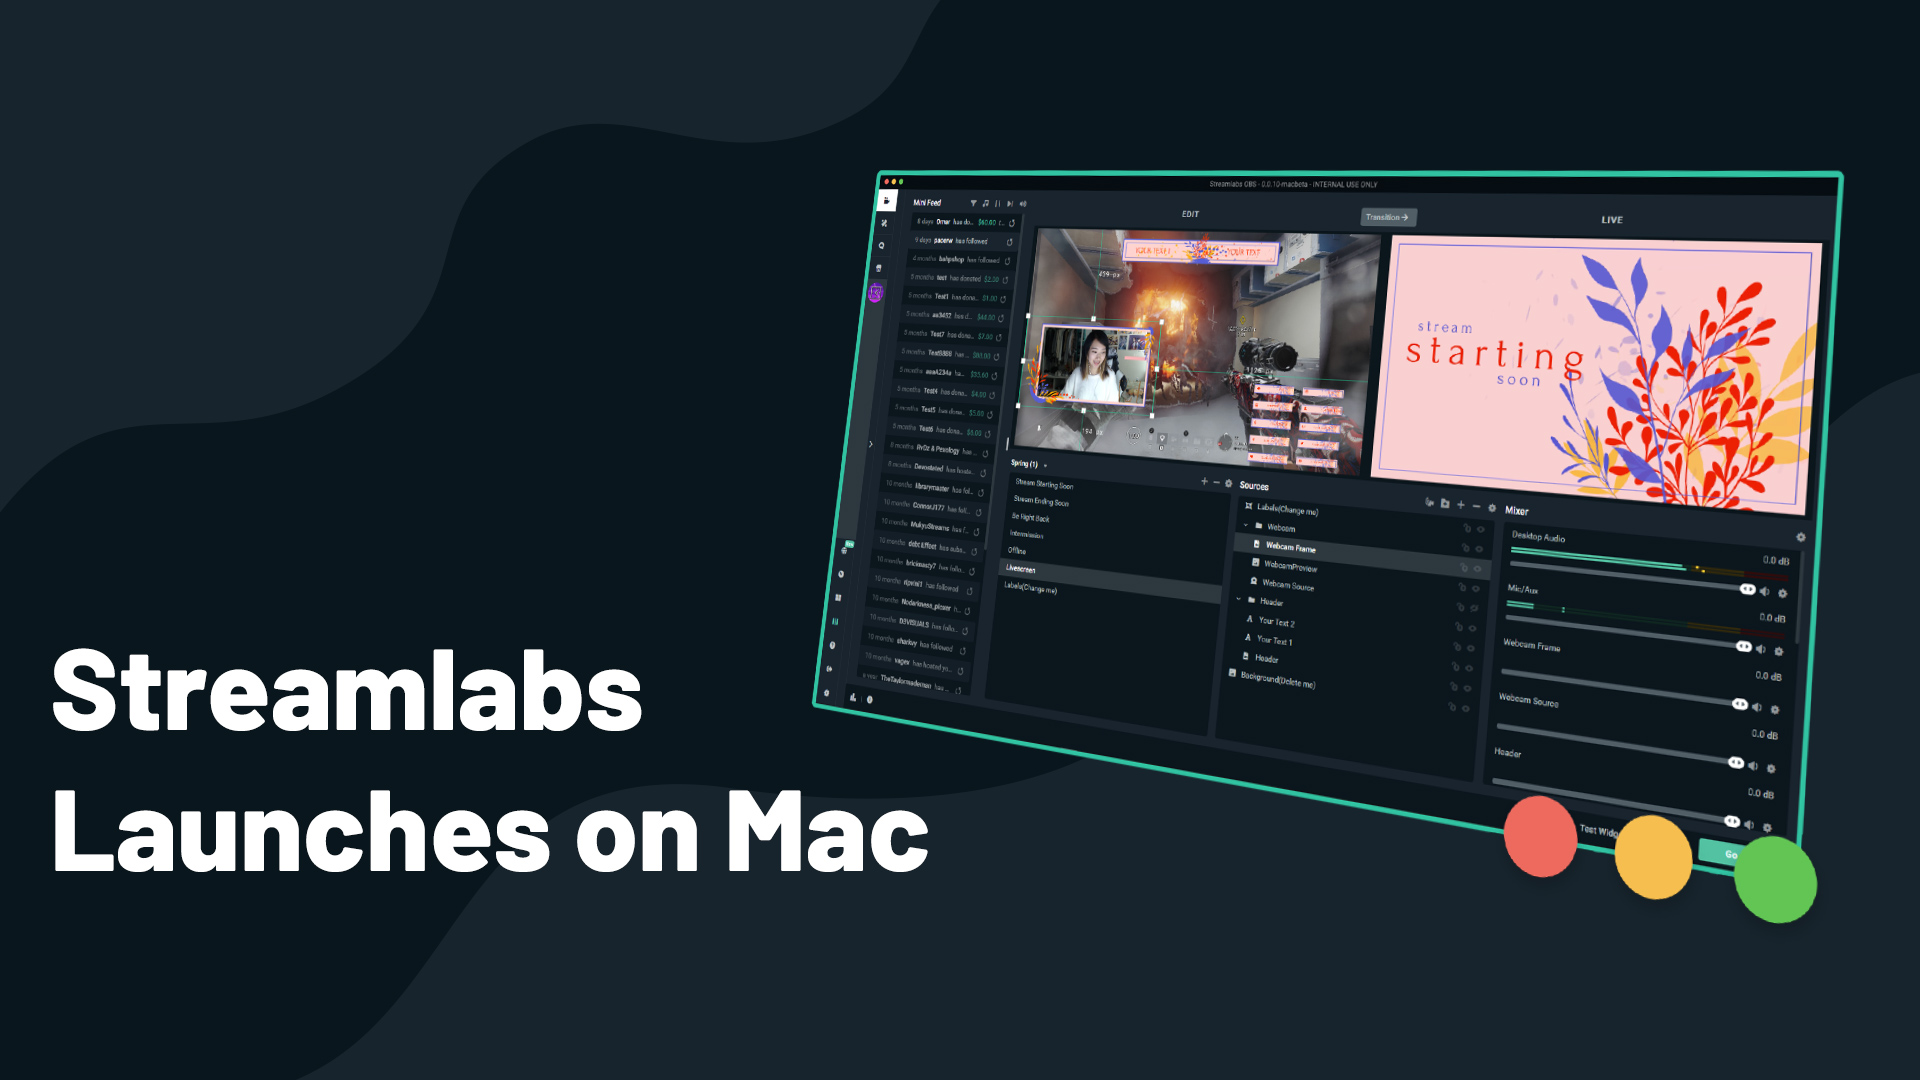 photo of Logitech-Owned Streamlabs Expands Streaming Software to Mac image